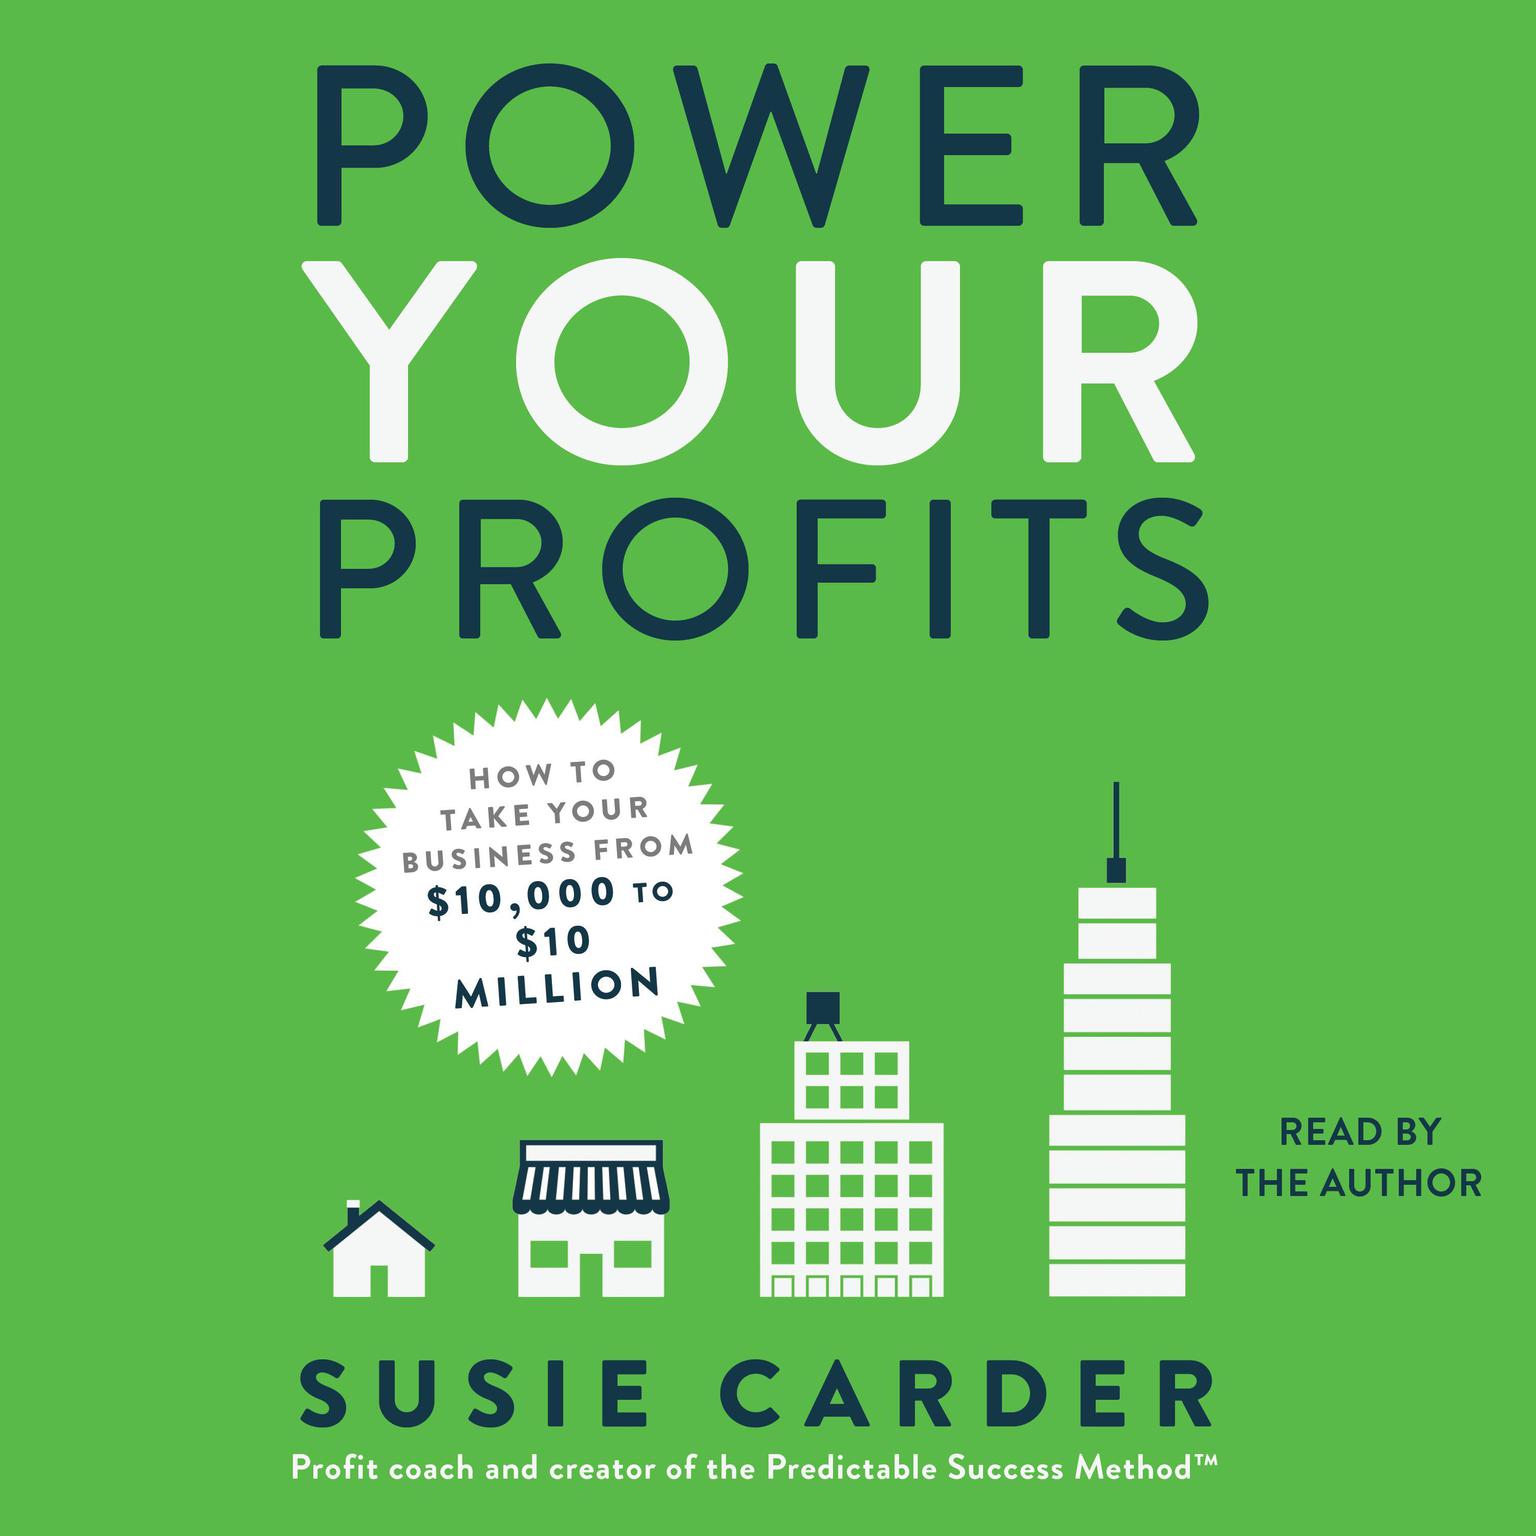 Power Your Profits: How to Take Your Business from $10,000 to $10,000,000 Audiobook, by Susie Carder